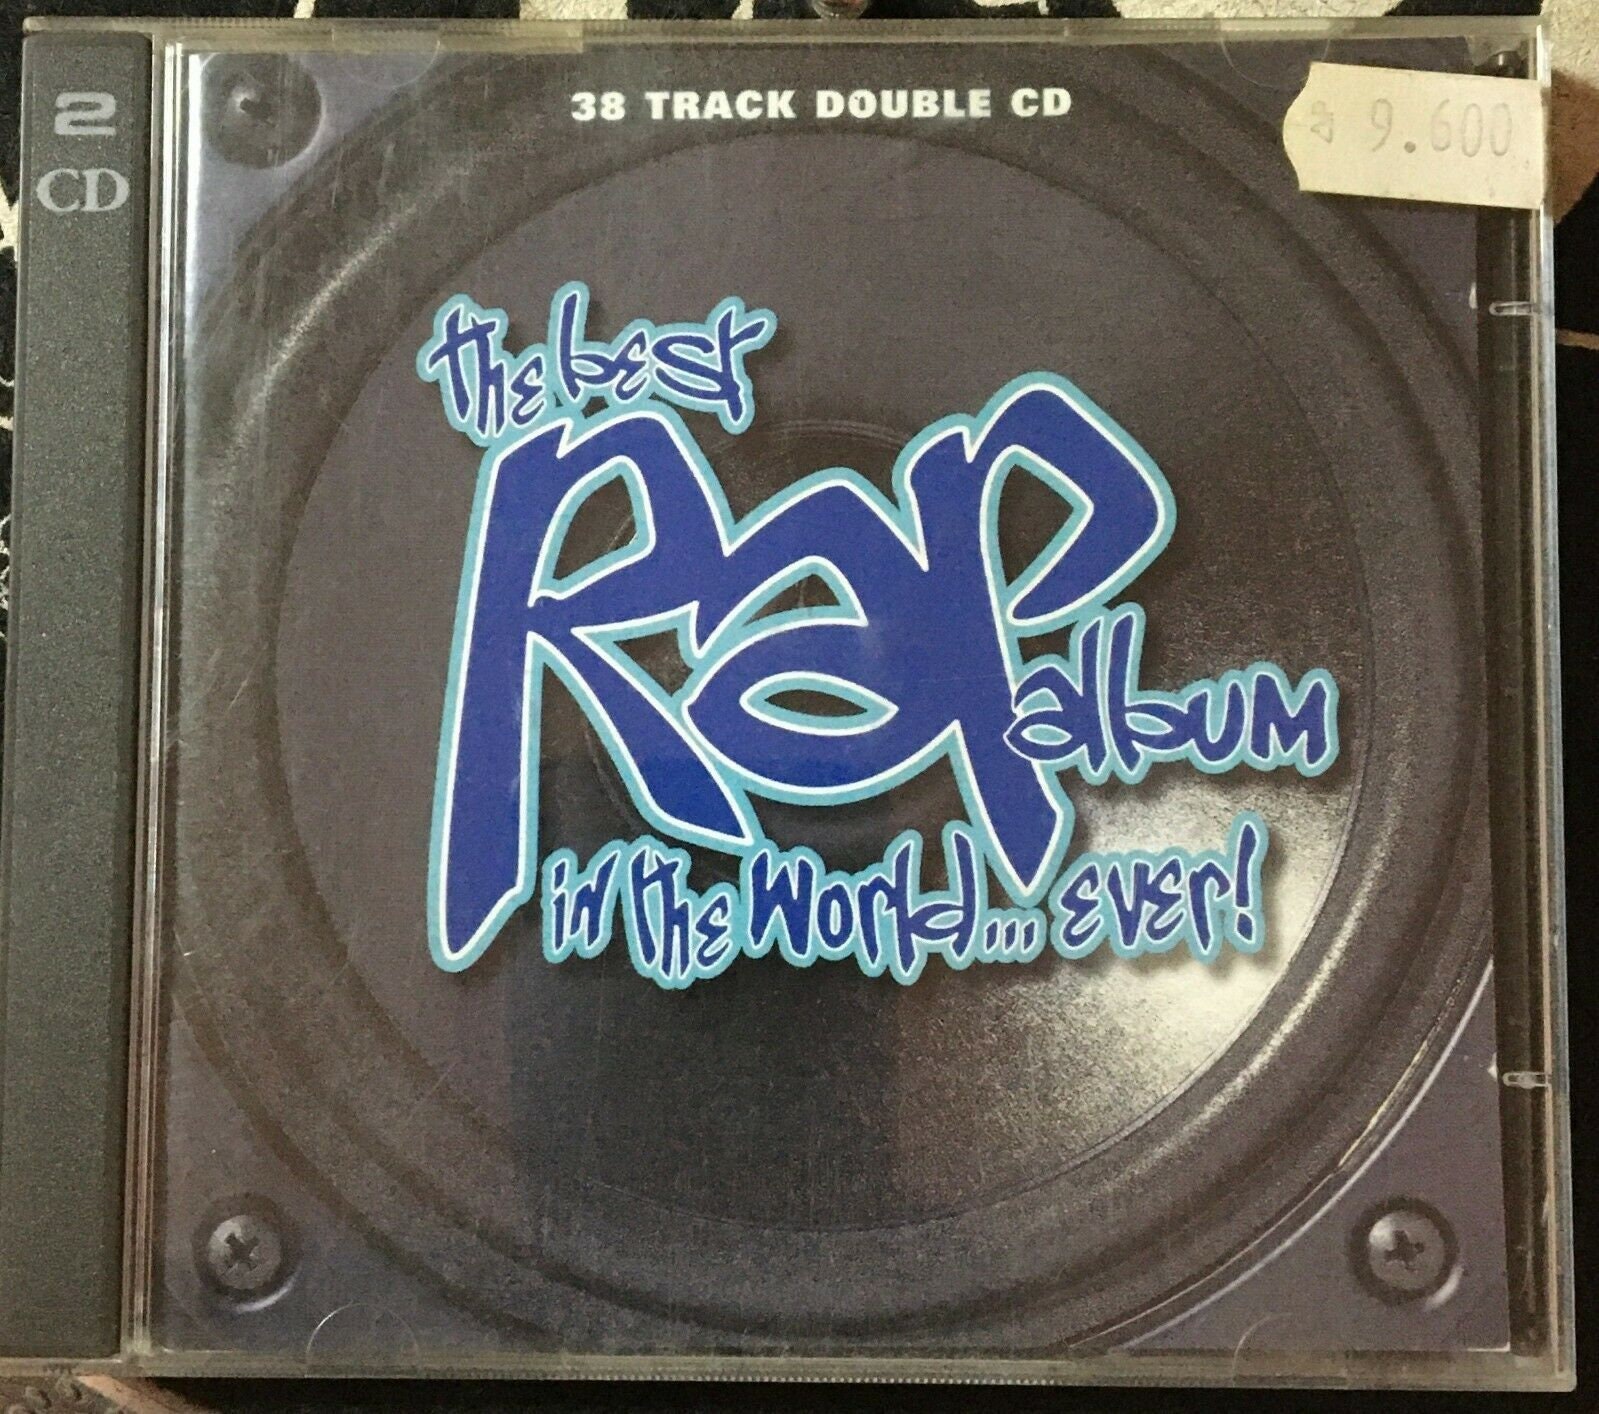 CD the Best Rap Album in the Worldever 2 CD, Compilation -  UK